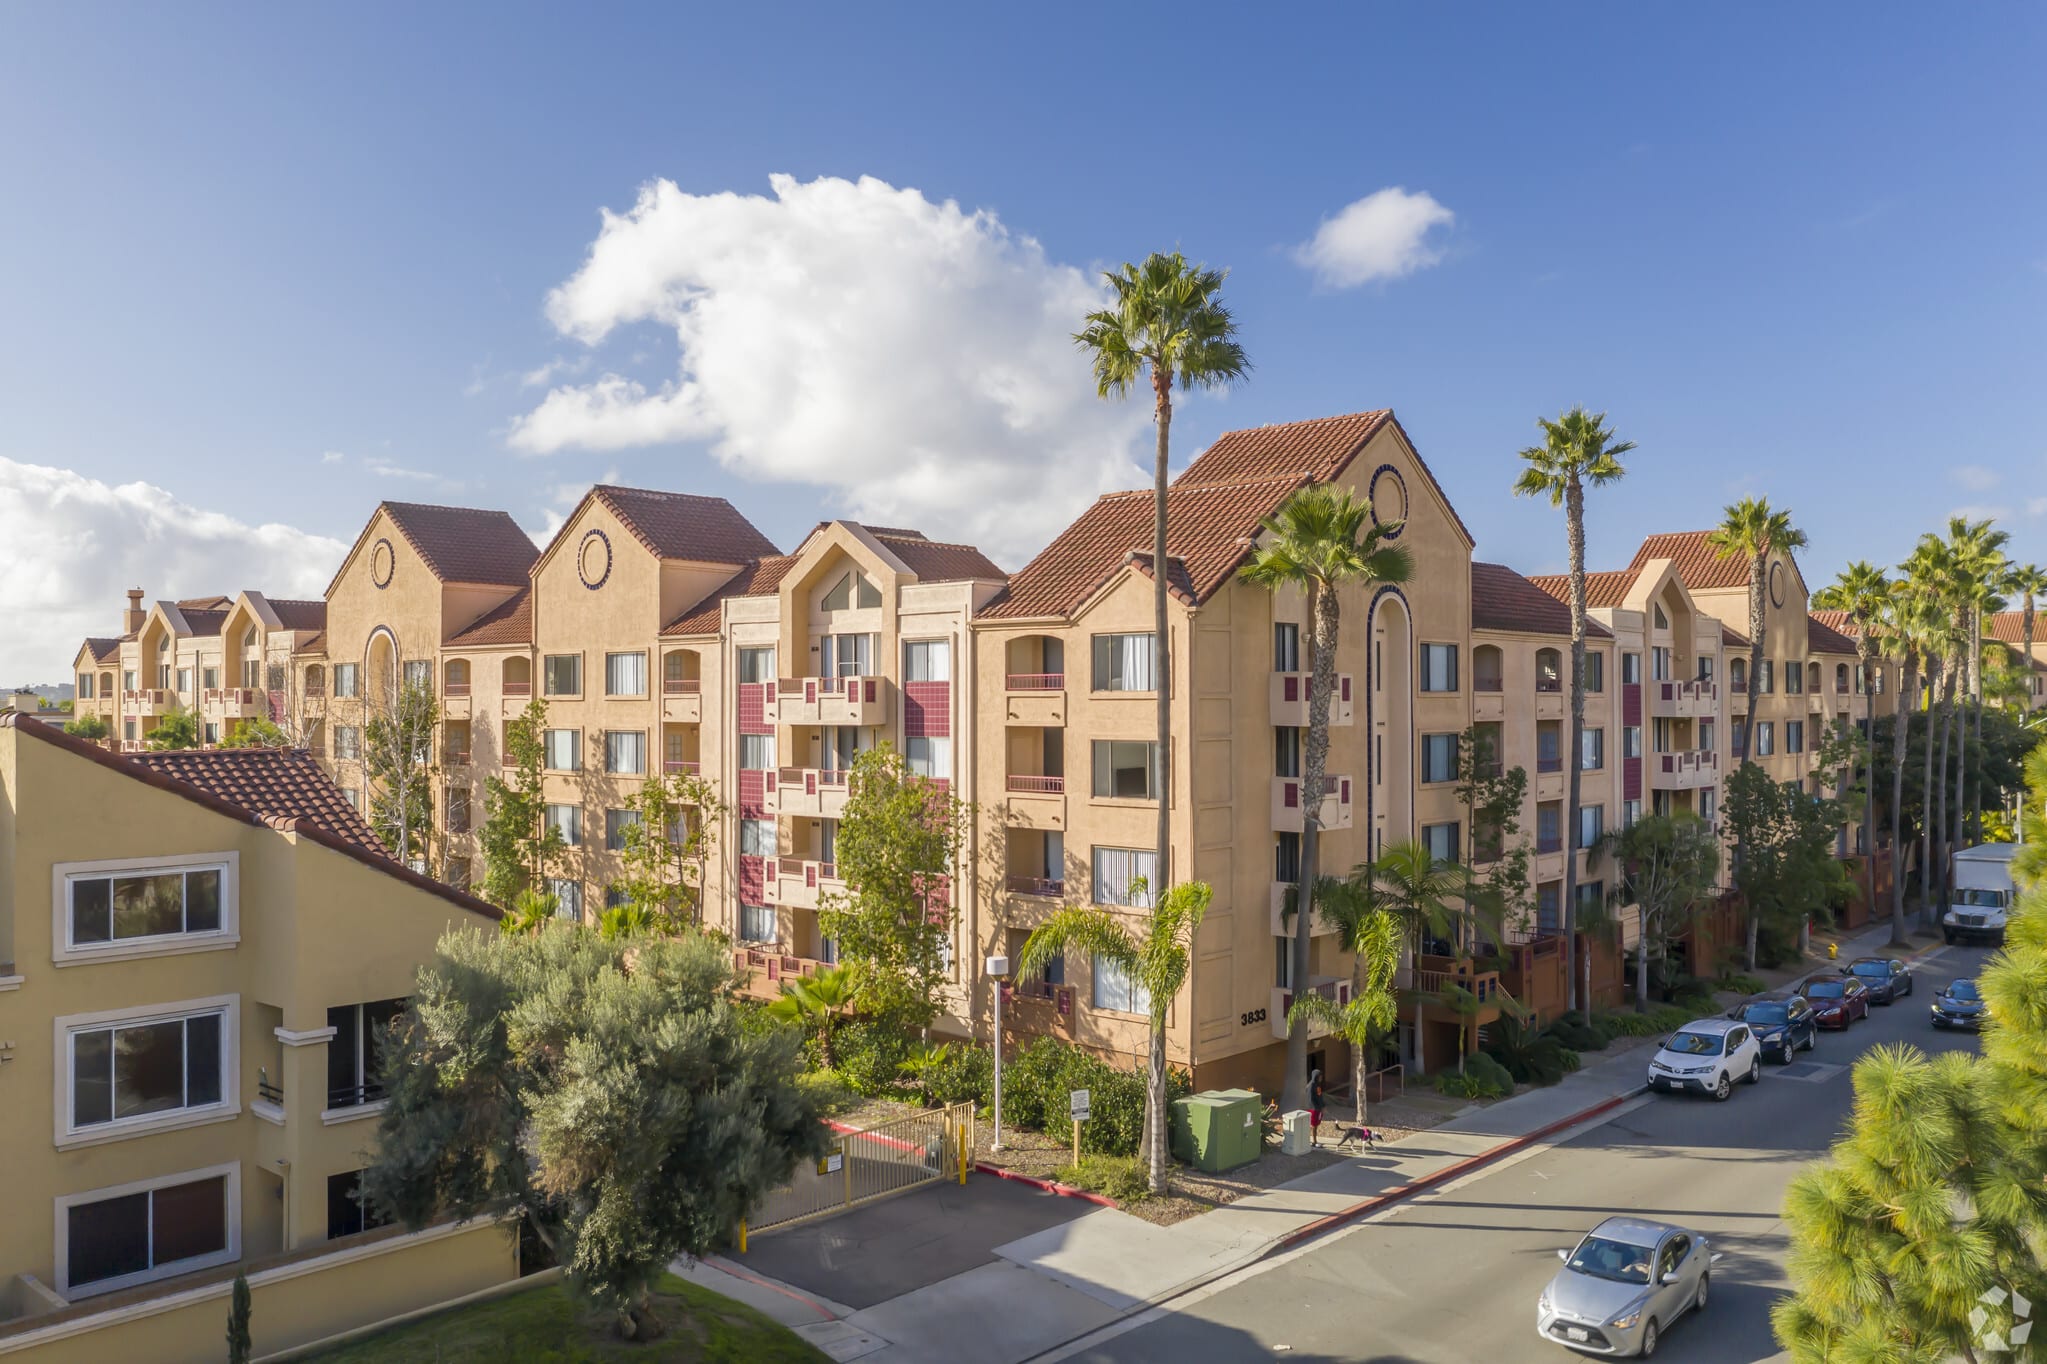 Street view of Apartment Complex in San Diego